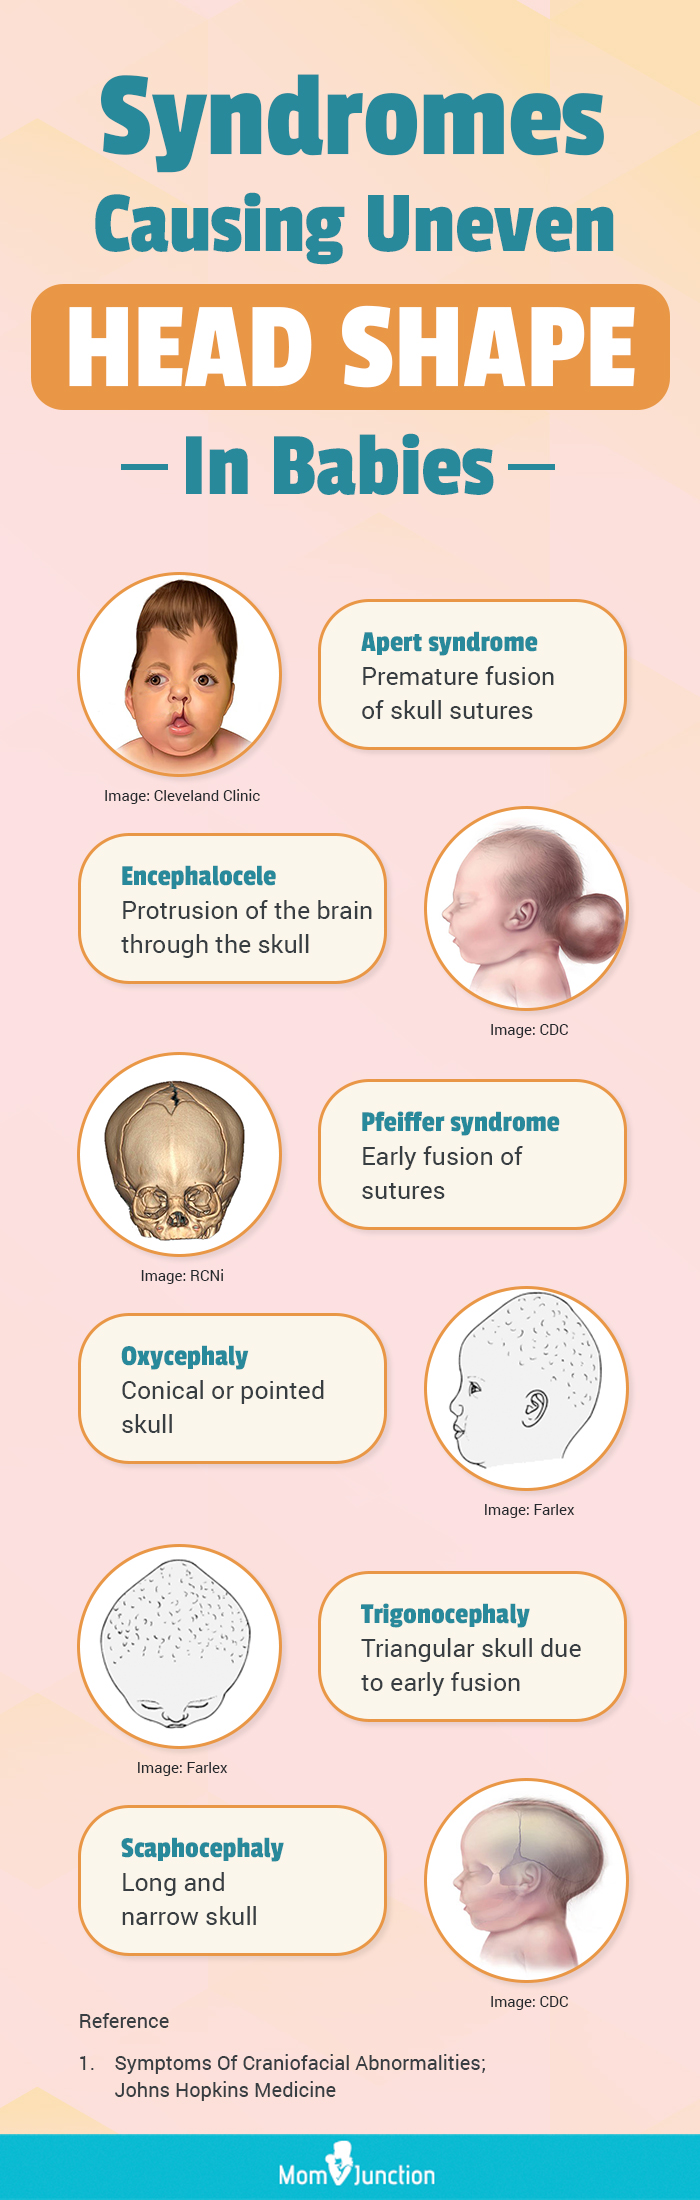 syndromes causing uneven head shape in babies [infographic]